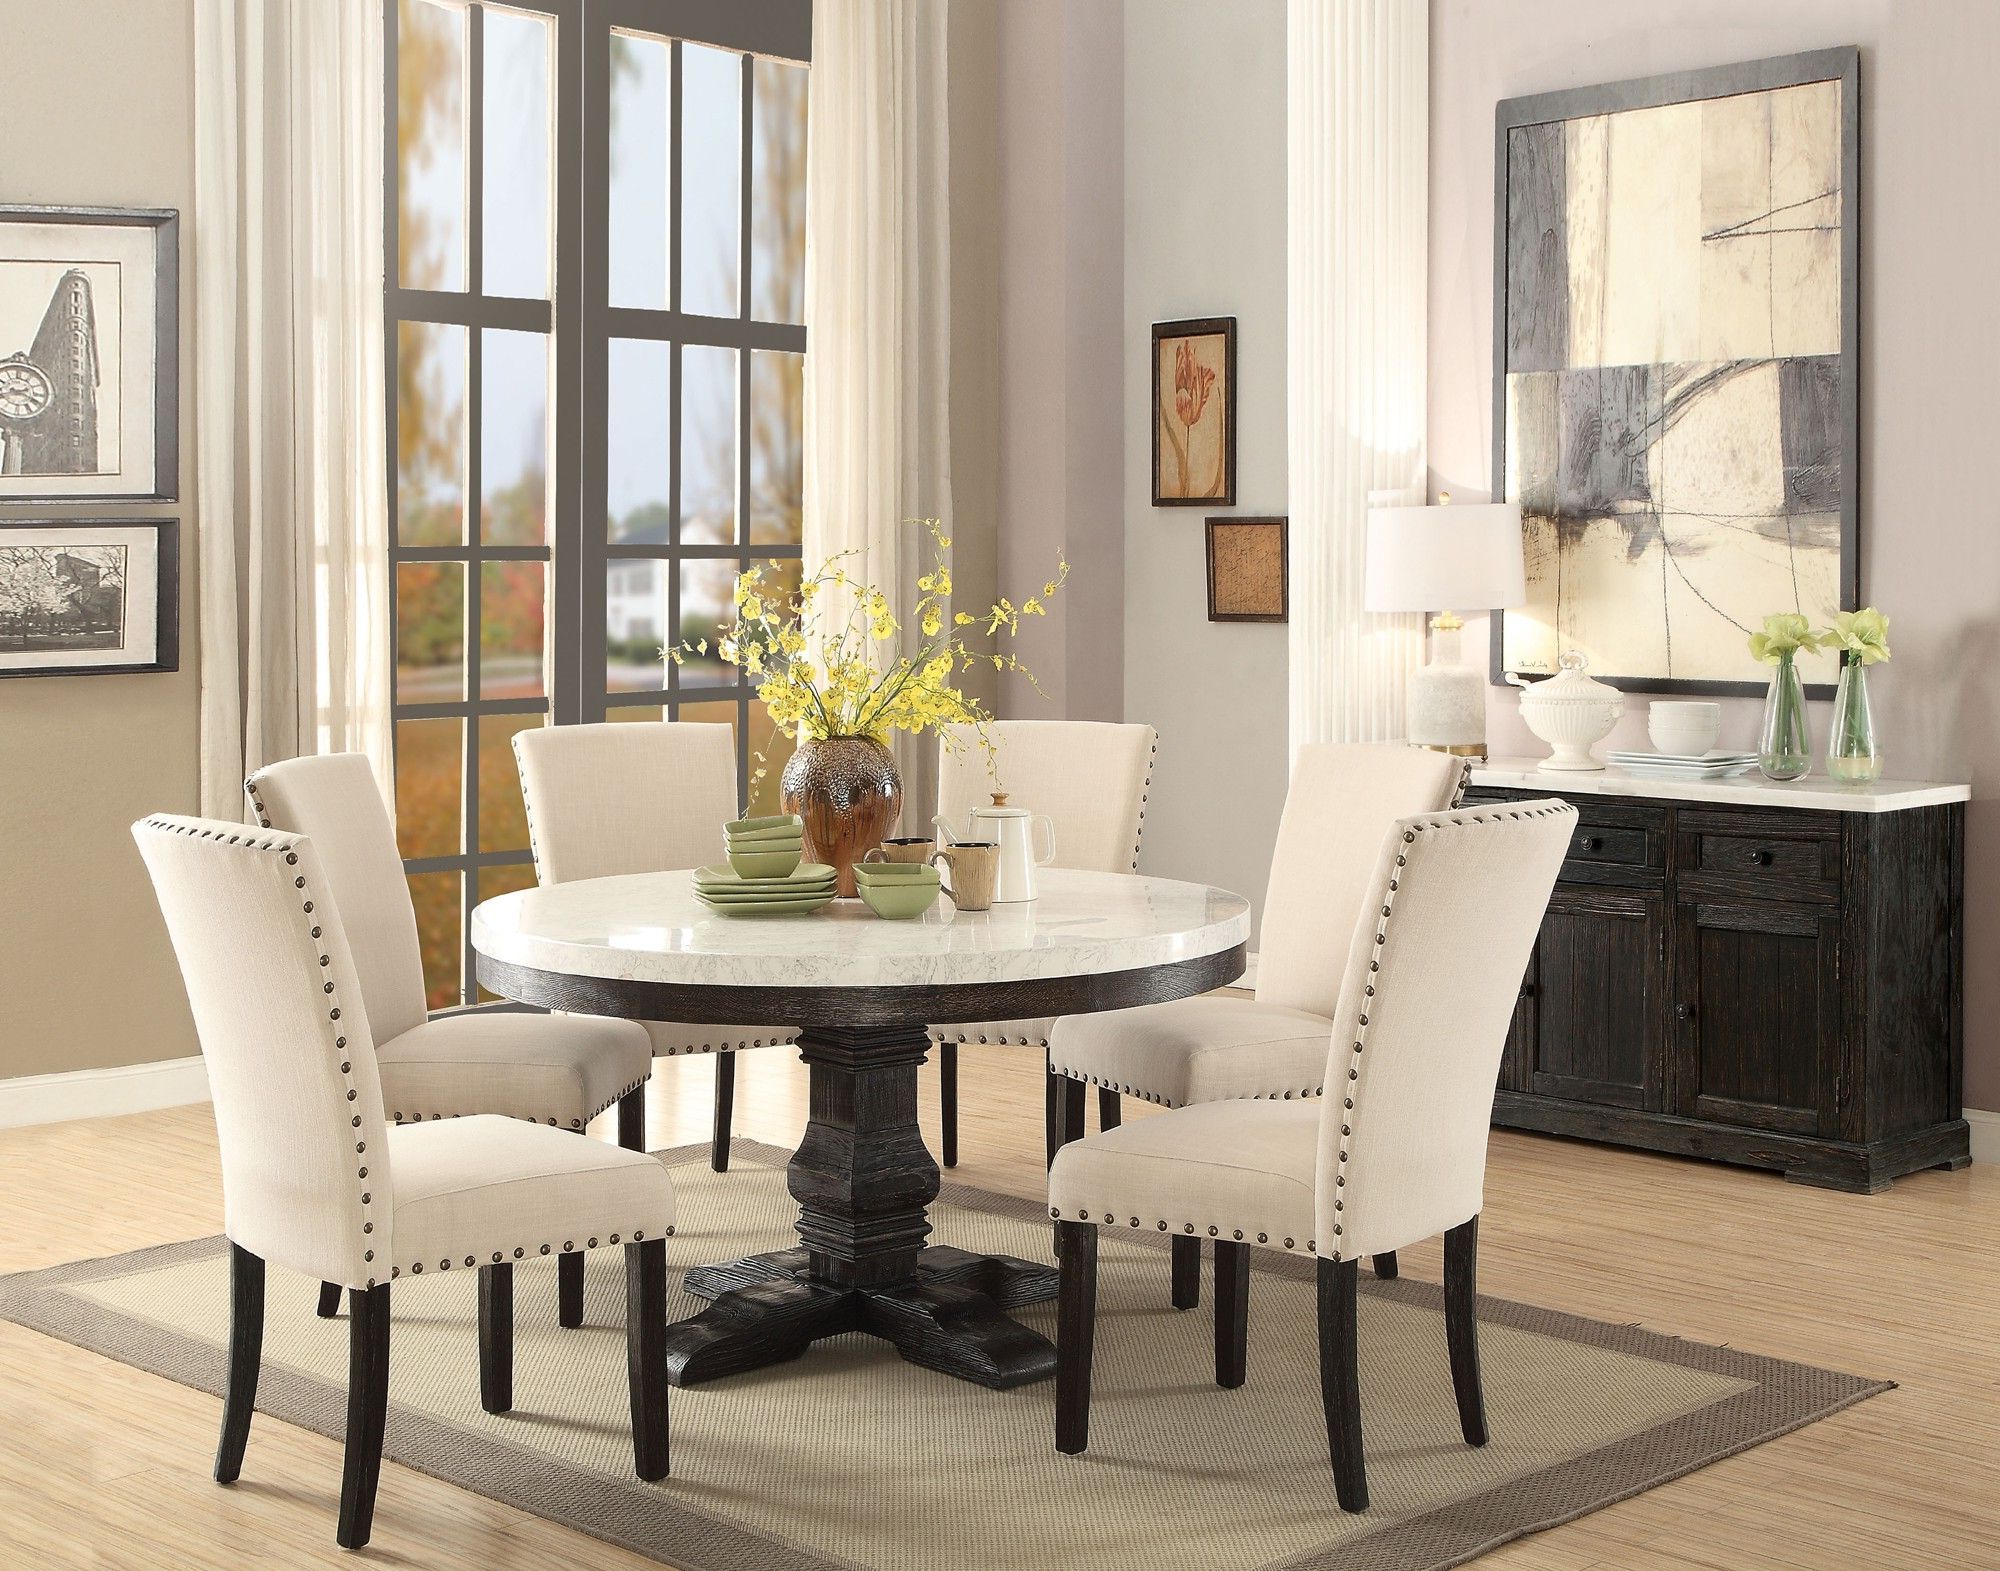 Acme 72845 Nolan 5Pcs White Marble Top Round Dining Table With Regard To Popular Nolan Round Pedestal Dining Tables (View 7 of 25)